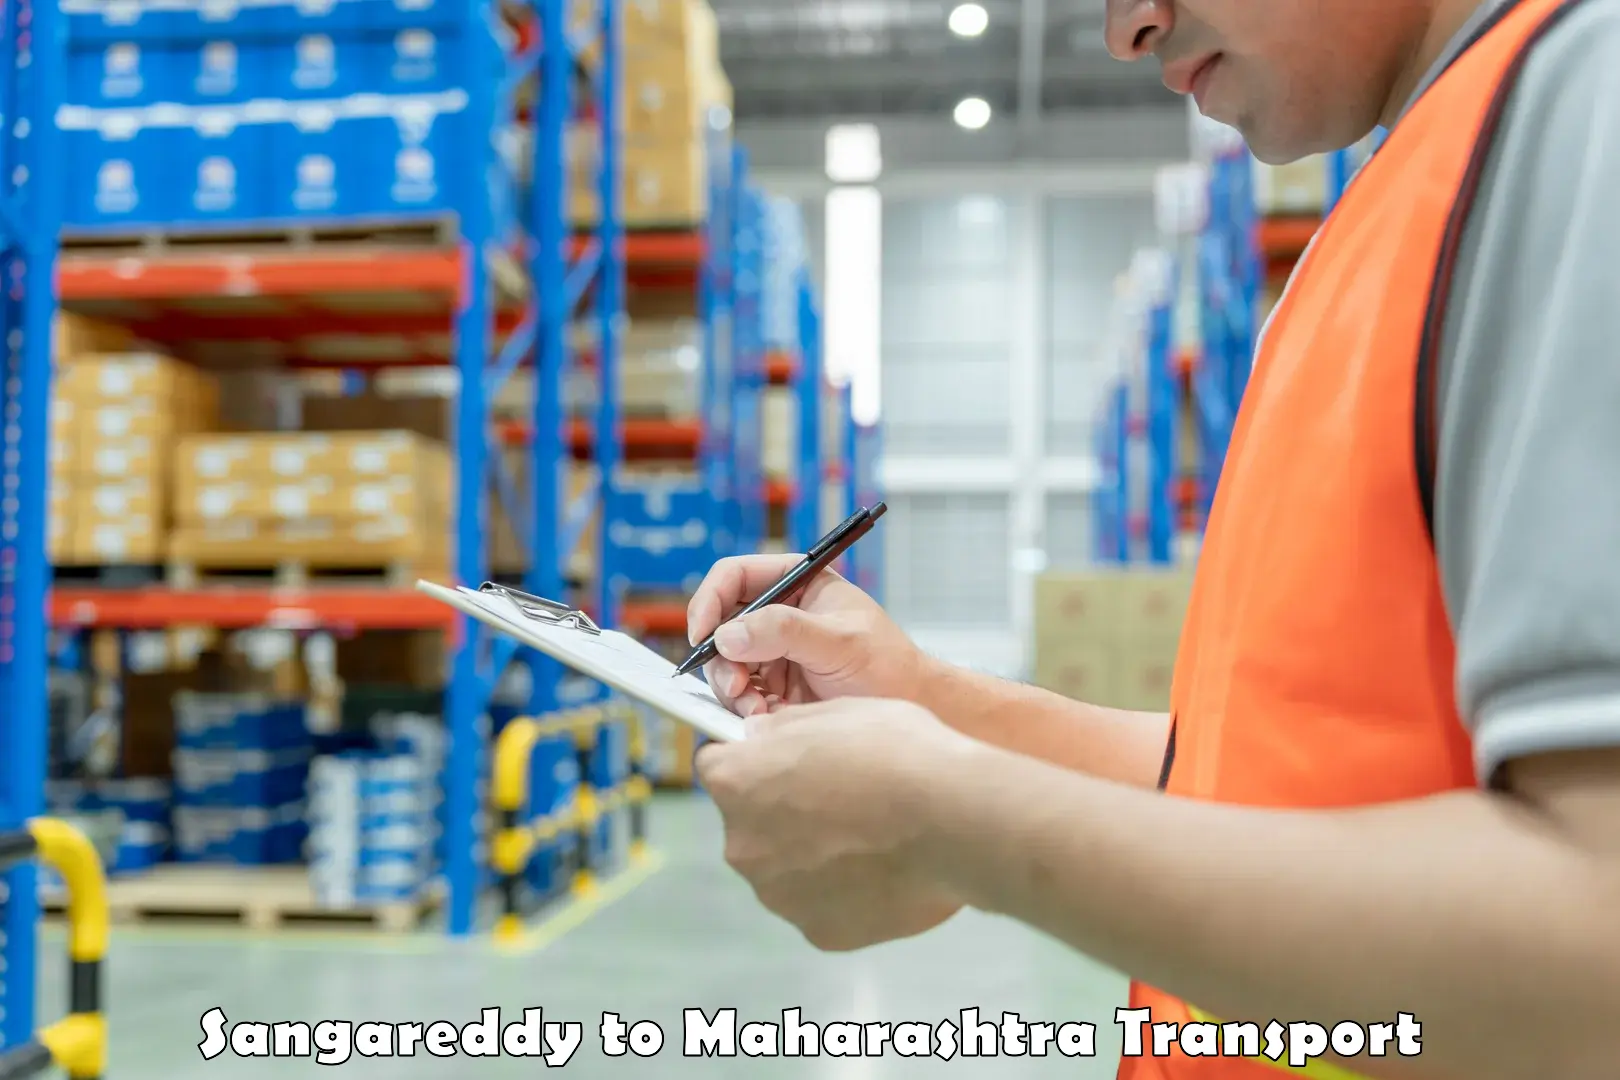 Truck transport companies in India Sangareddy to Kalbadevi